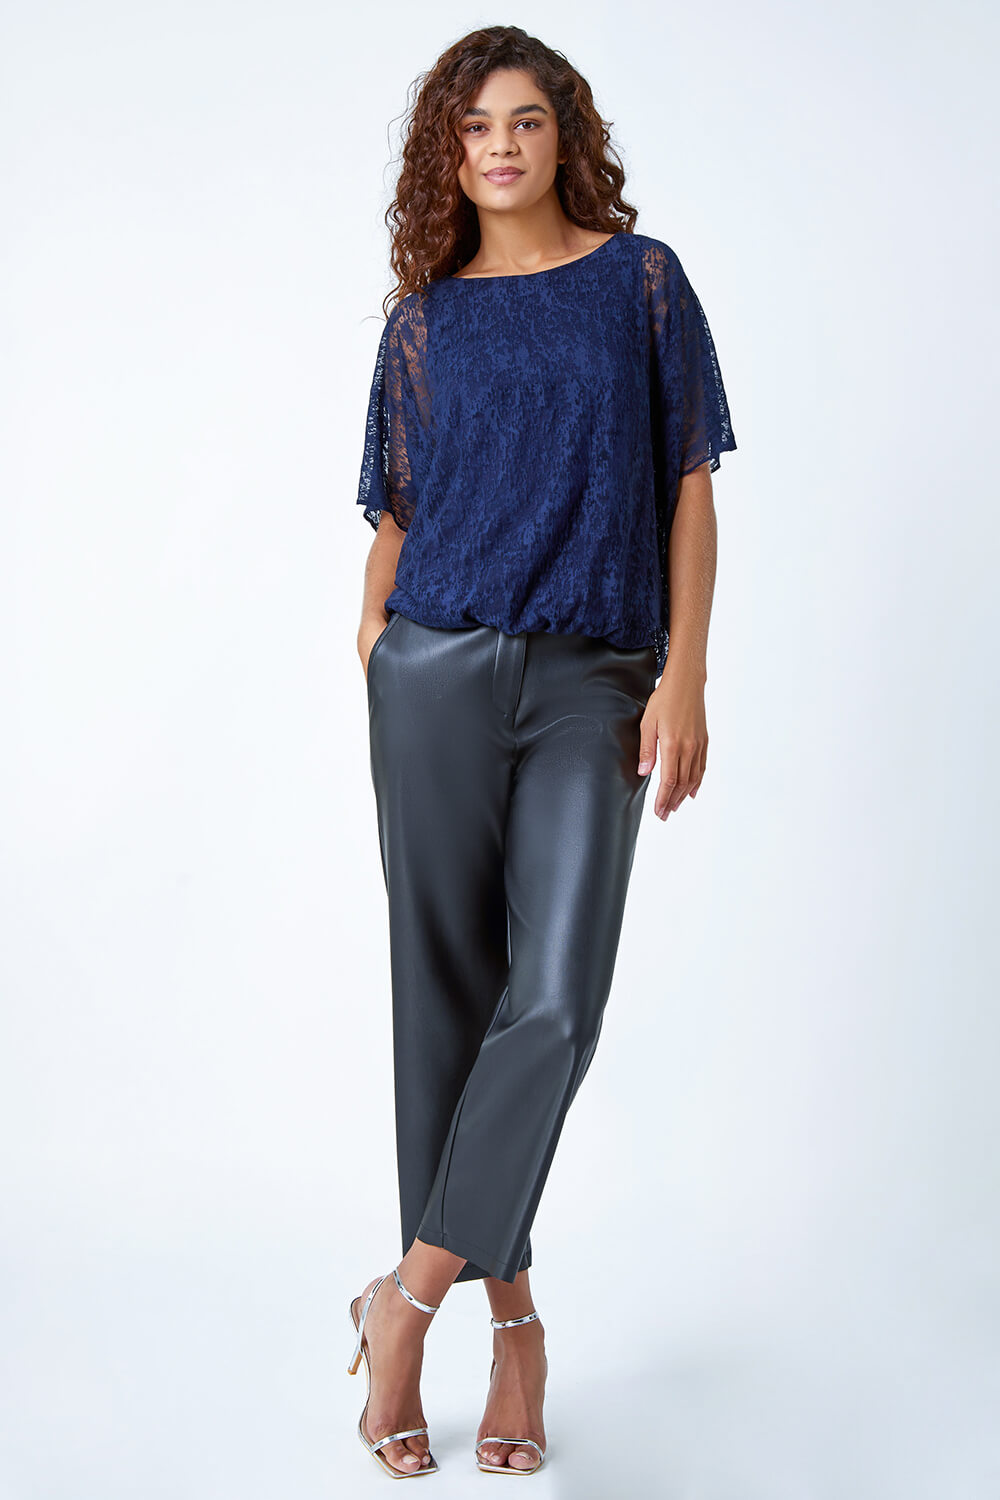 Midnight Blue Textured Animal Blouson Stretch Top, Image 4 of 5